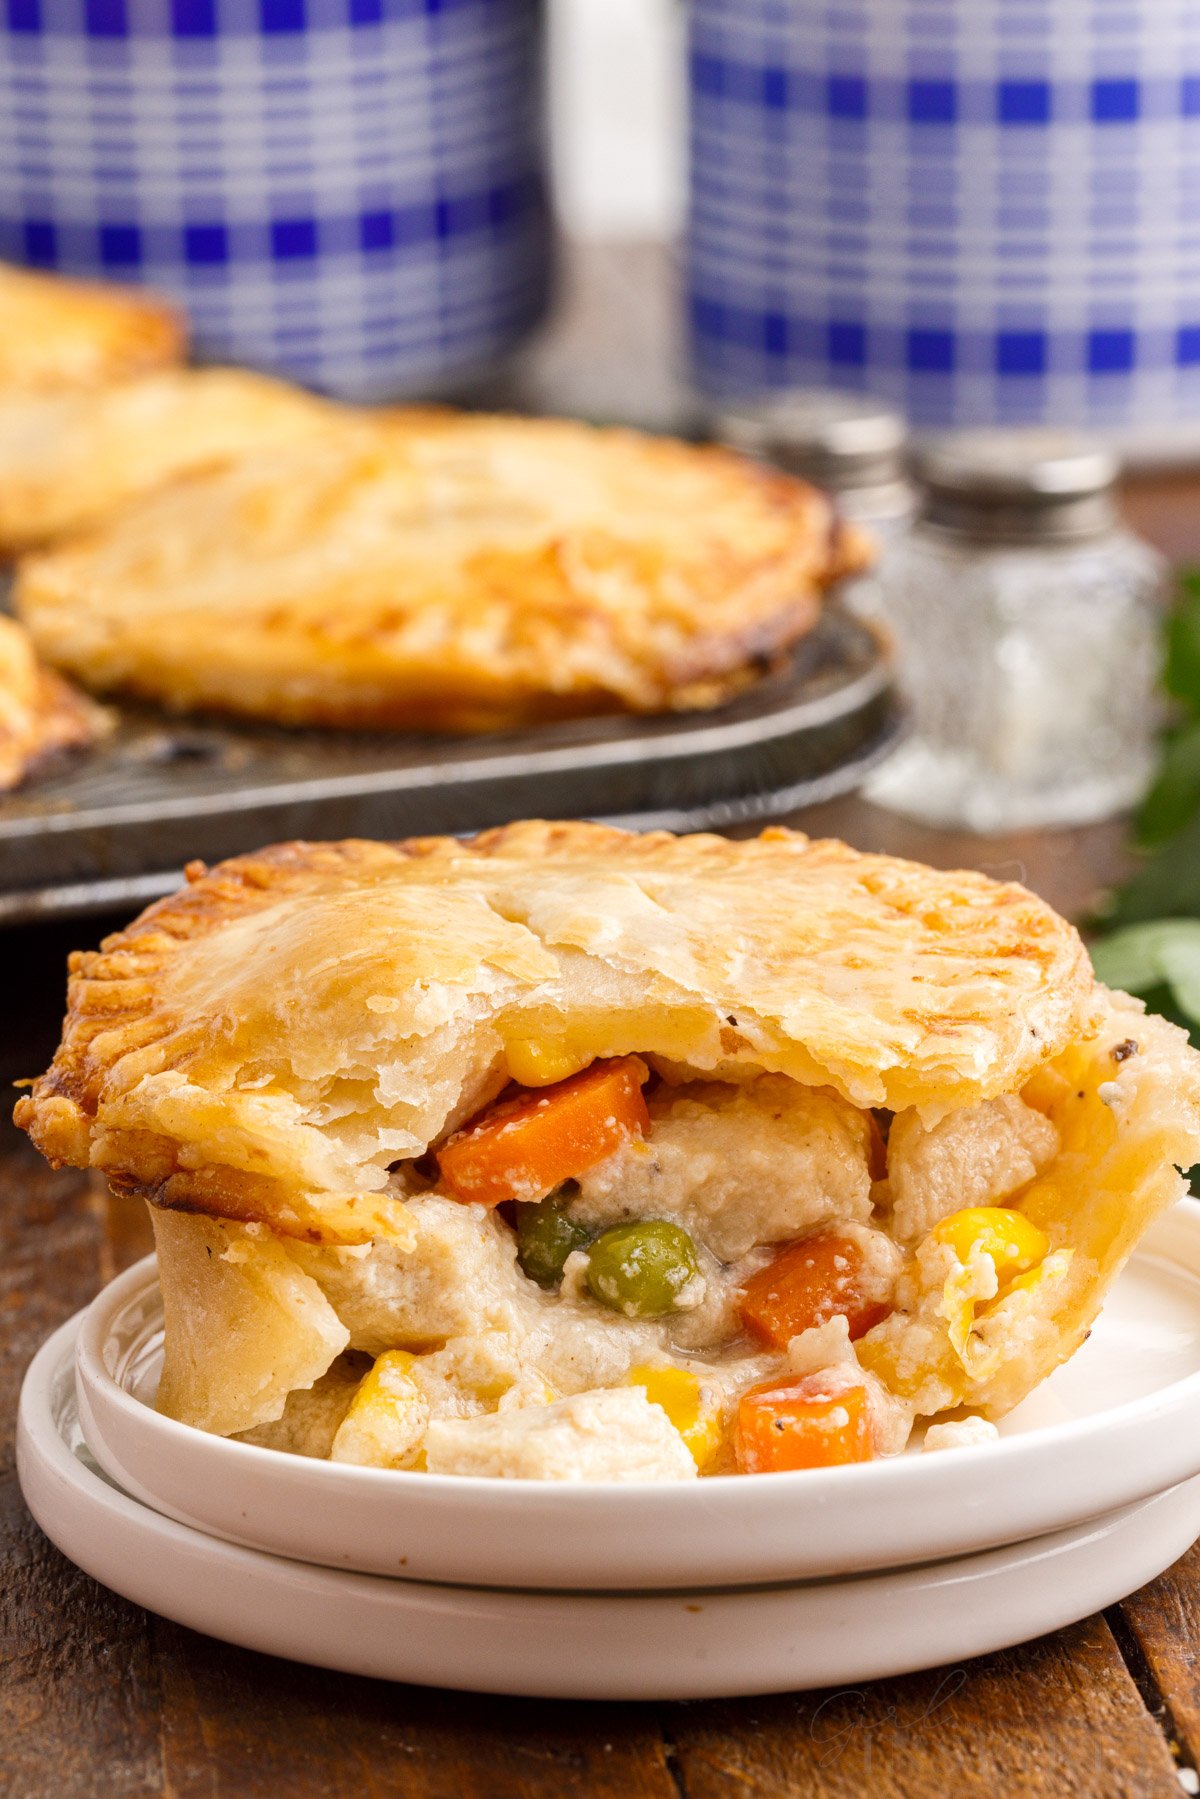 Front close up of a Mini Chicken Pot Pie on a plate cut open.